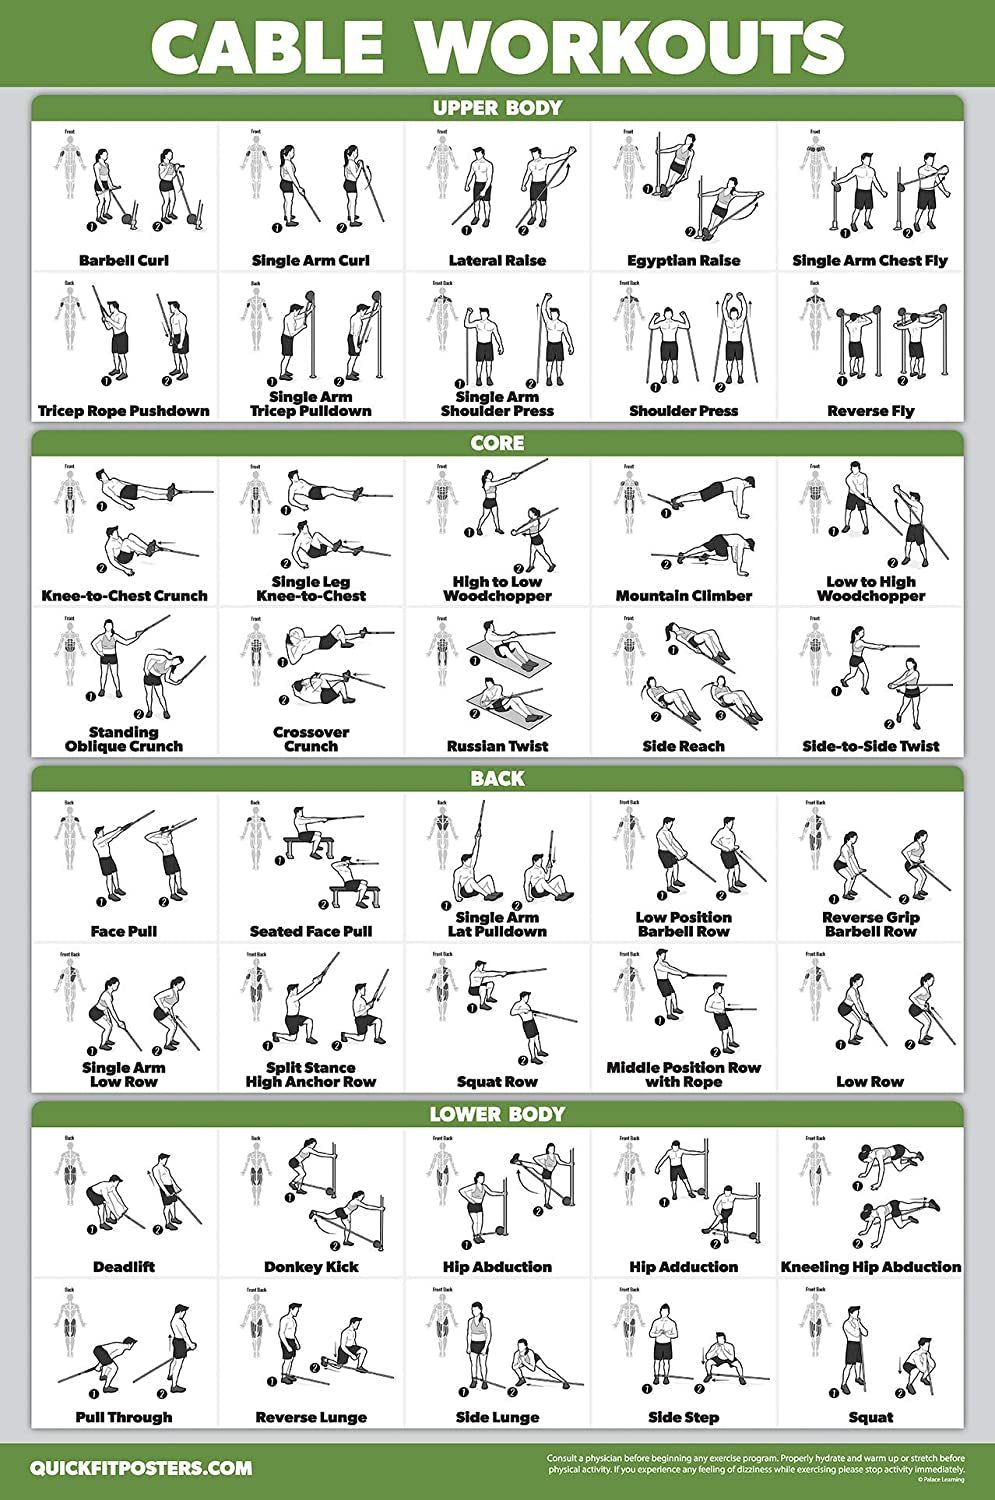 Quickfit 10 Pack - Exercise Workout Poster Set - Cable Machine, Dumbbell, Suspension, Kettlebell, Resistance Bands, Stretching, Bodyweight, Barbell, Yoga Poses, Exercise Ball - LAMINATED / 18 x 24